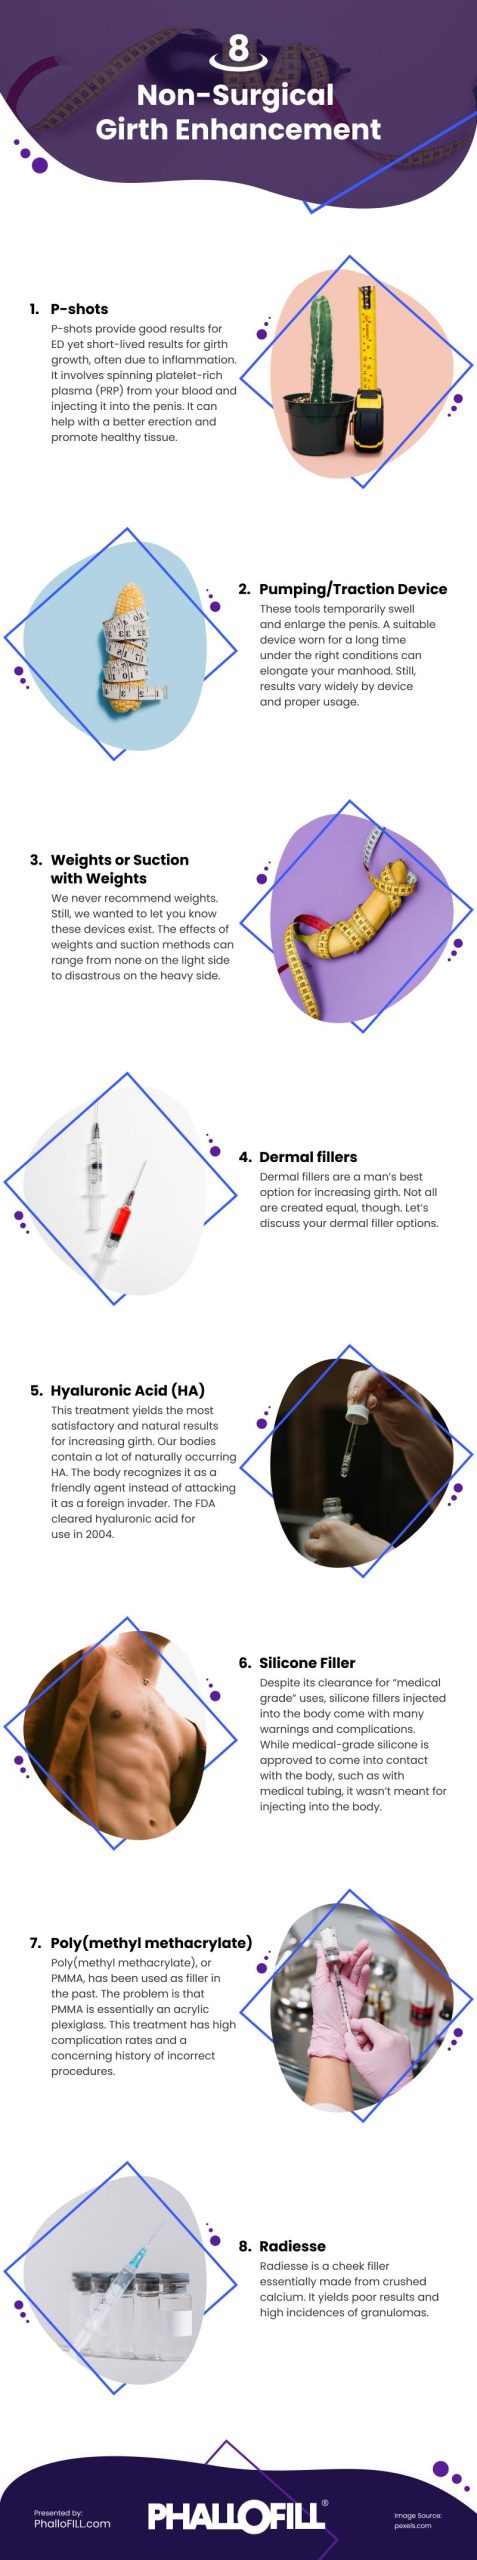 8 Non-Surgical Girth Enhancement Infographic